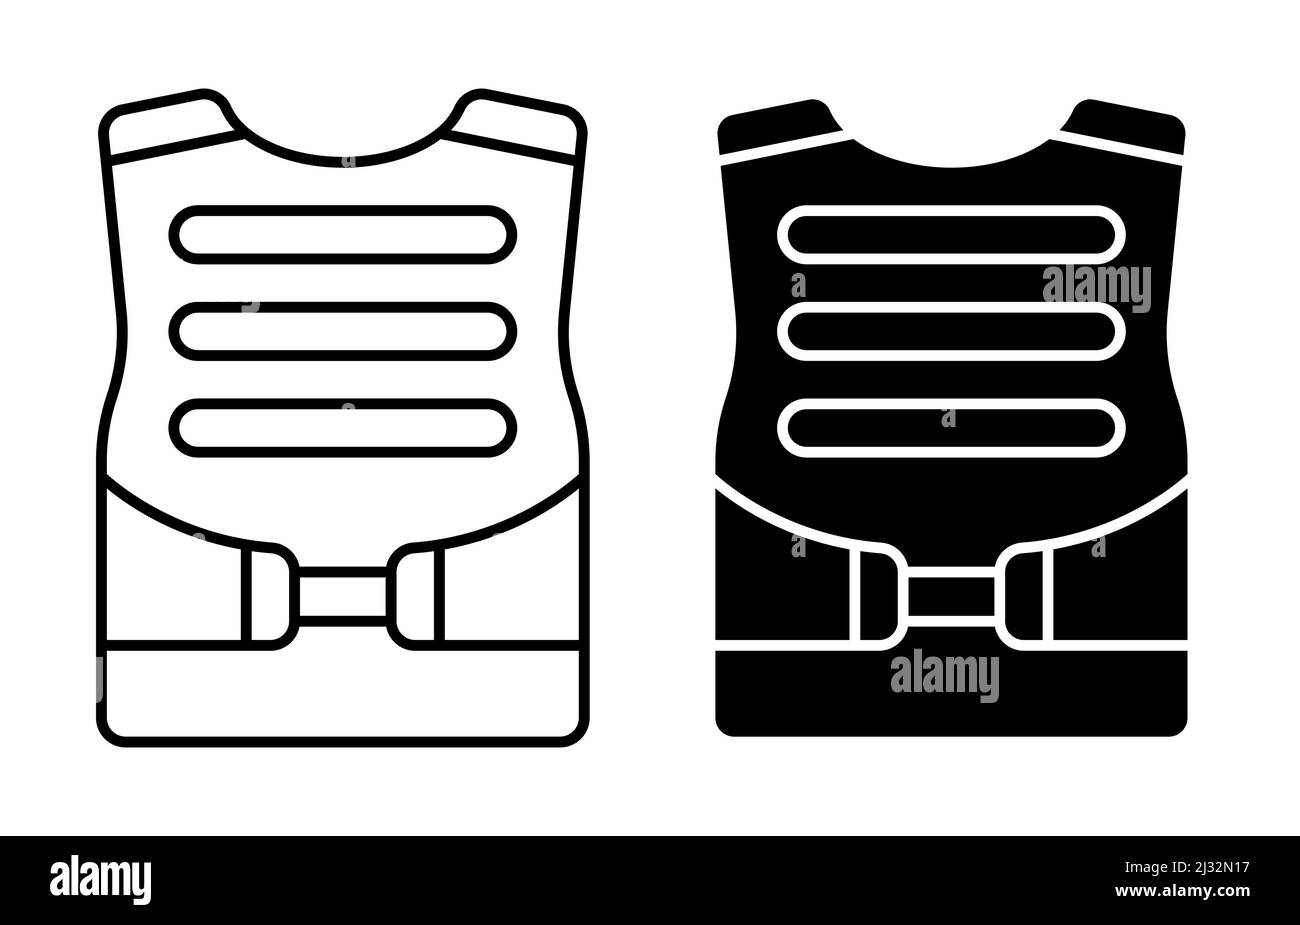 Linear icon, soldier body armor. Equipment for protection of chest of soldier in battle. Simple black and white vector isolated on white background Stock Vector